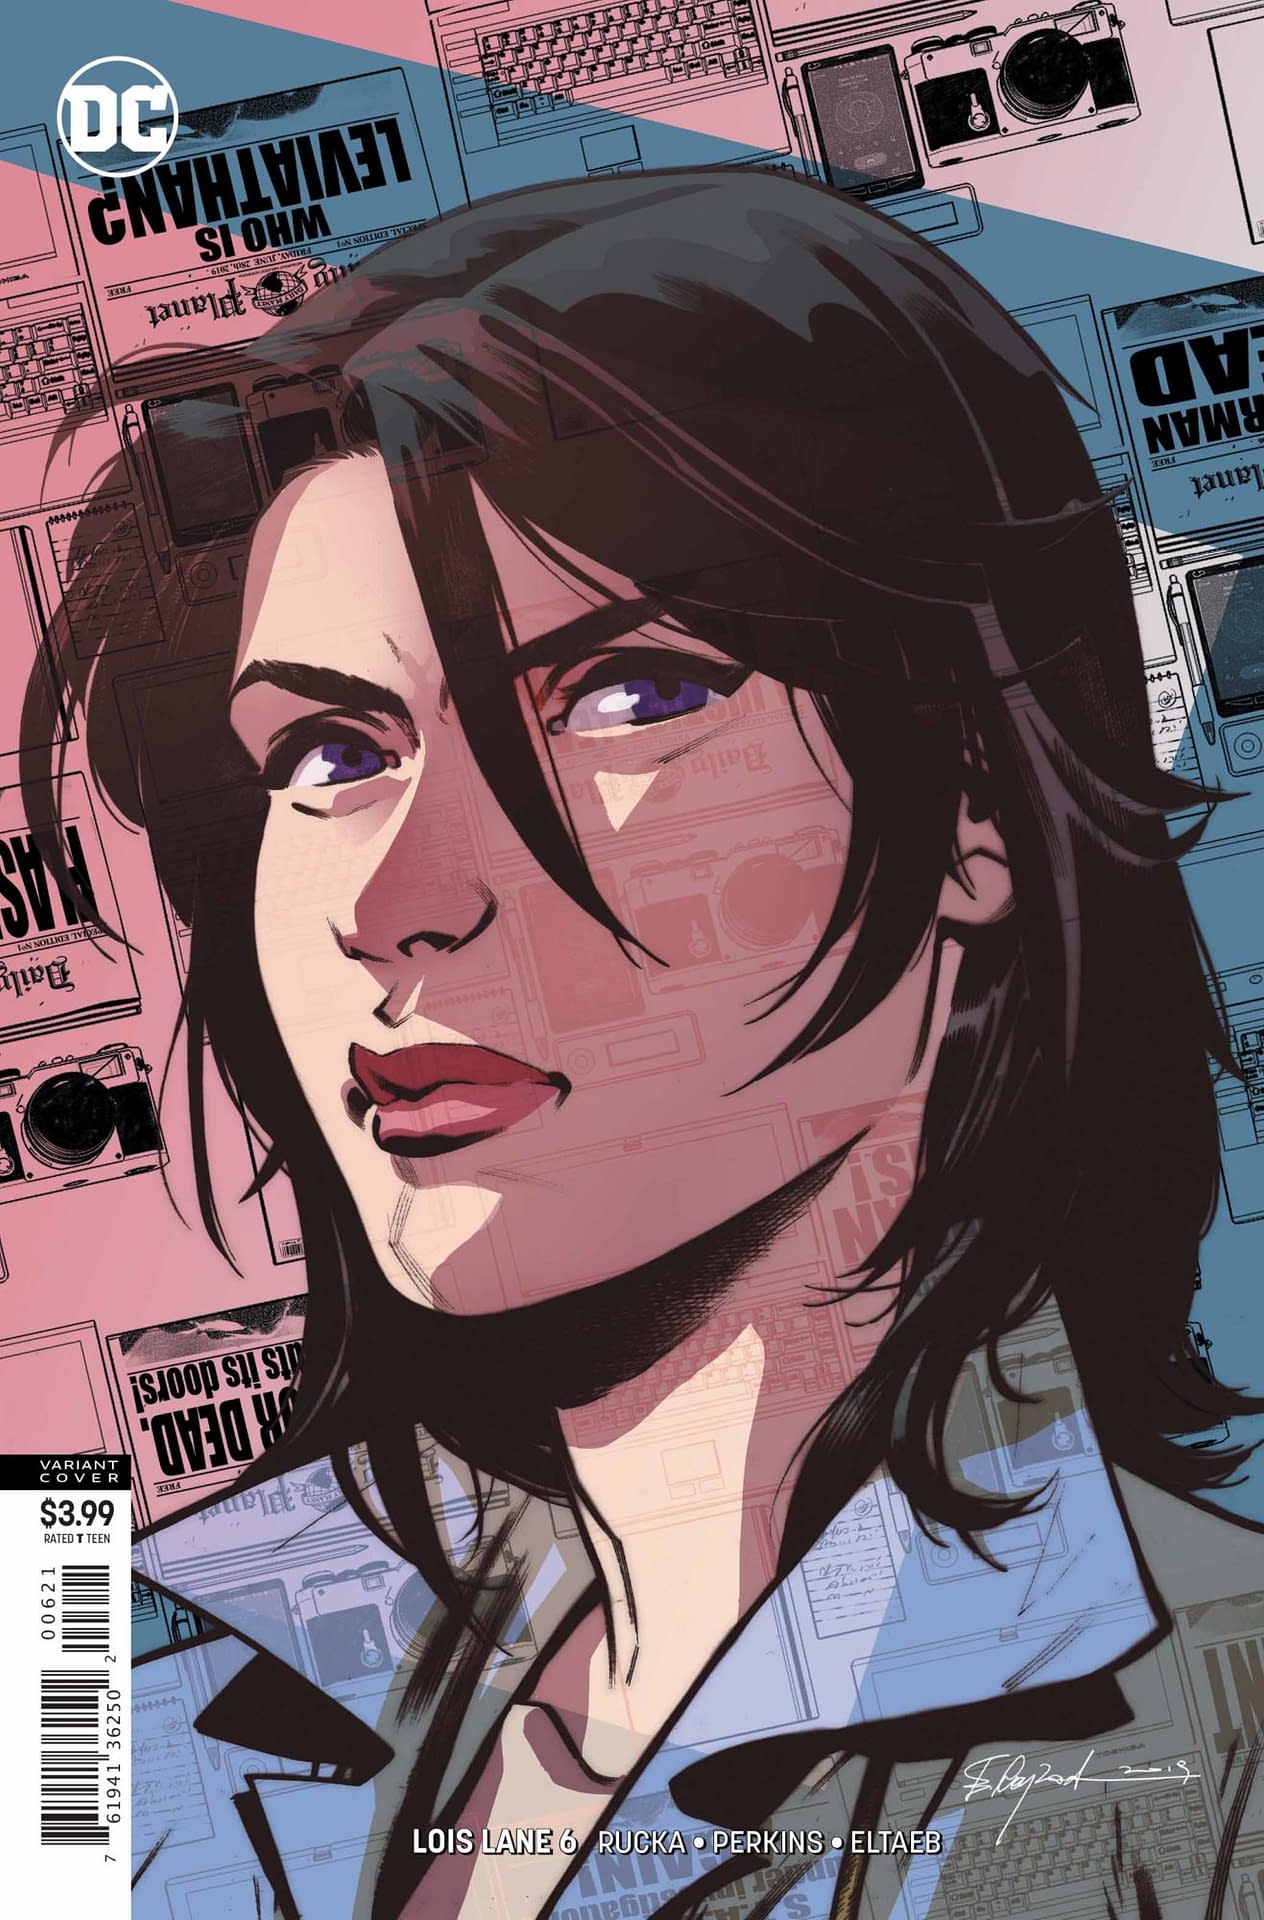 It's Time for Lois Lane to Put Her Daddy Issues Behind Her in Lois Lane #6 [Preview]